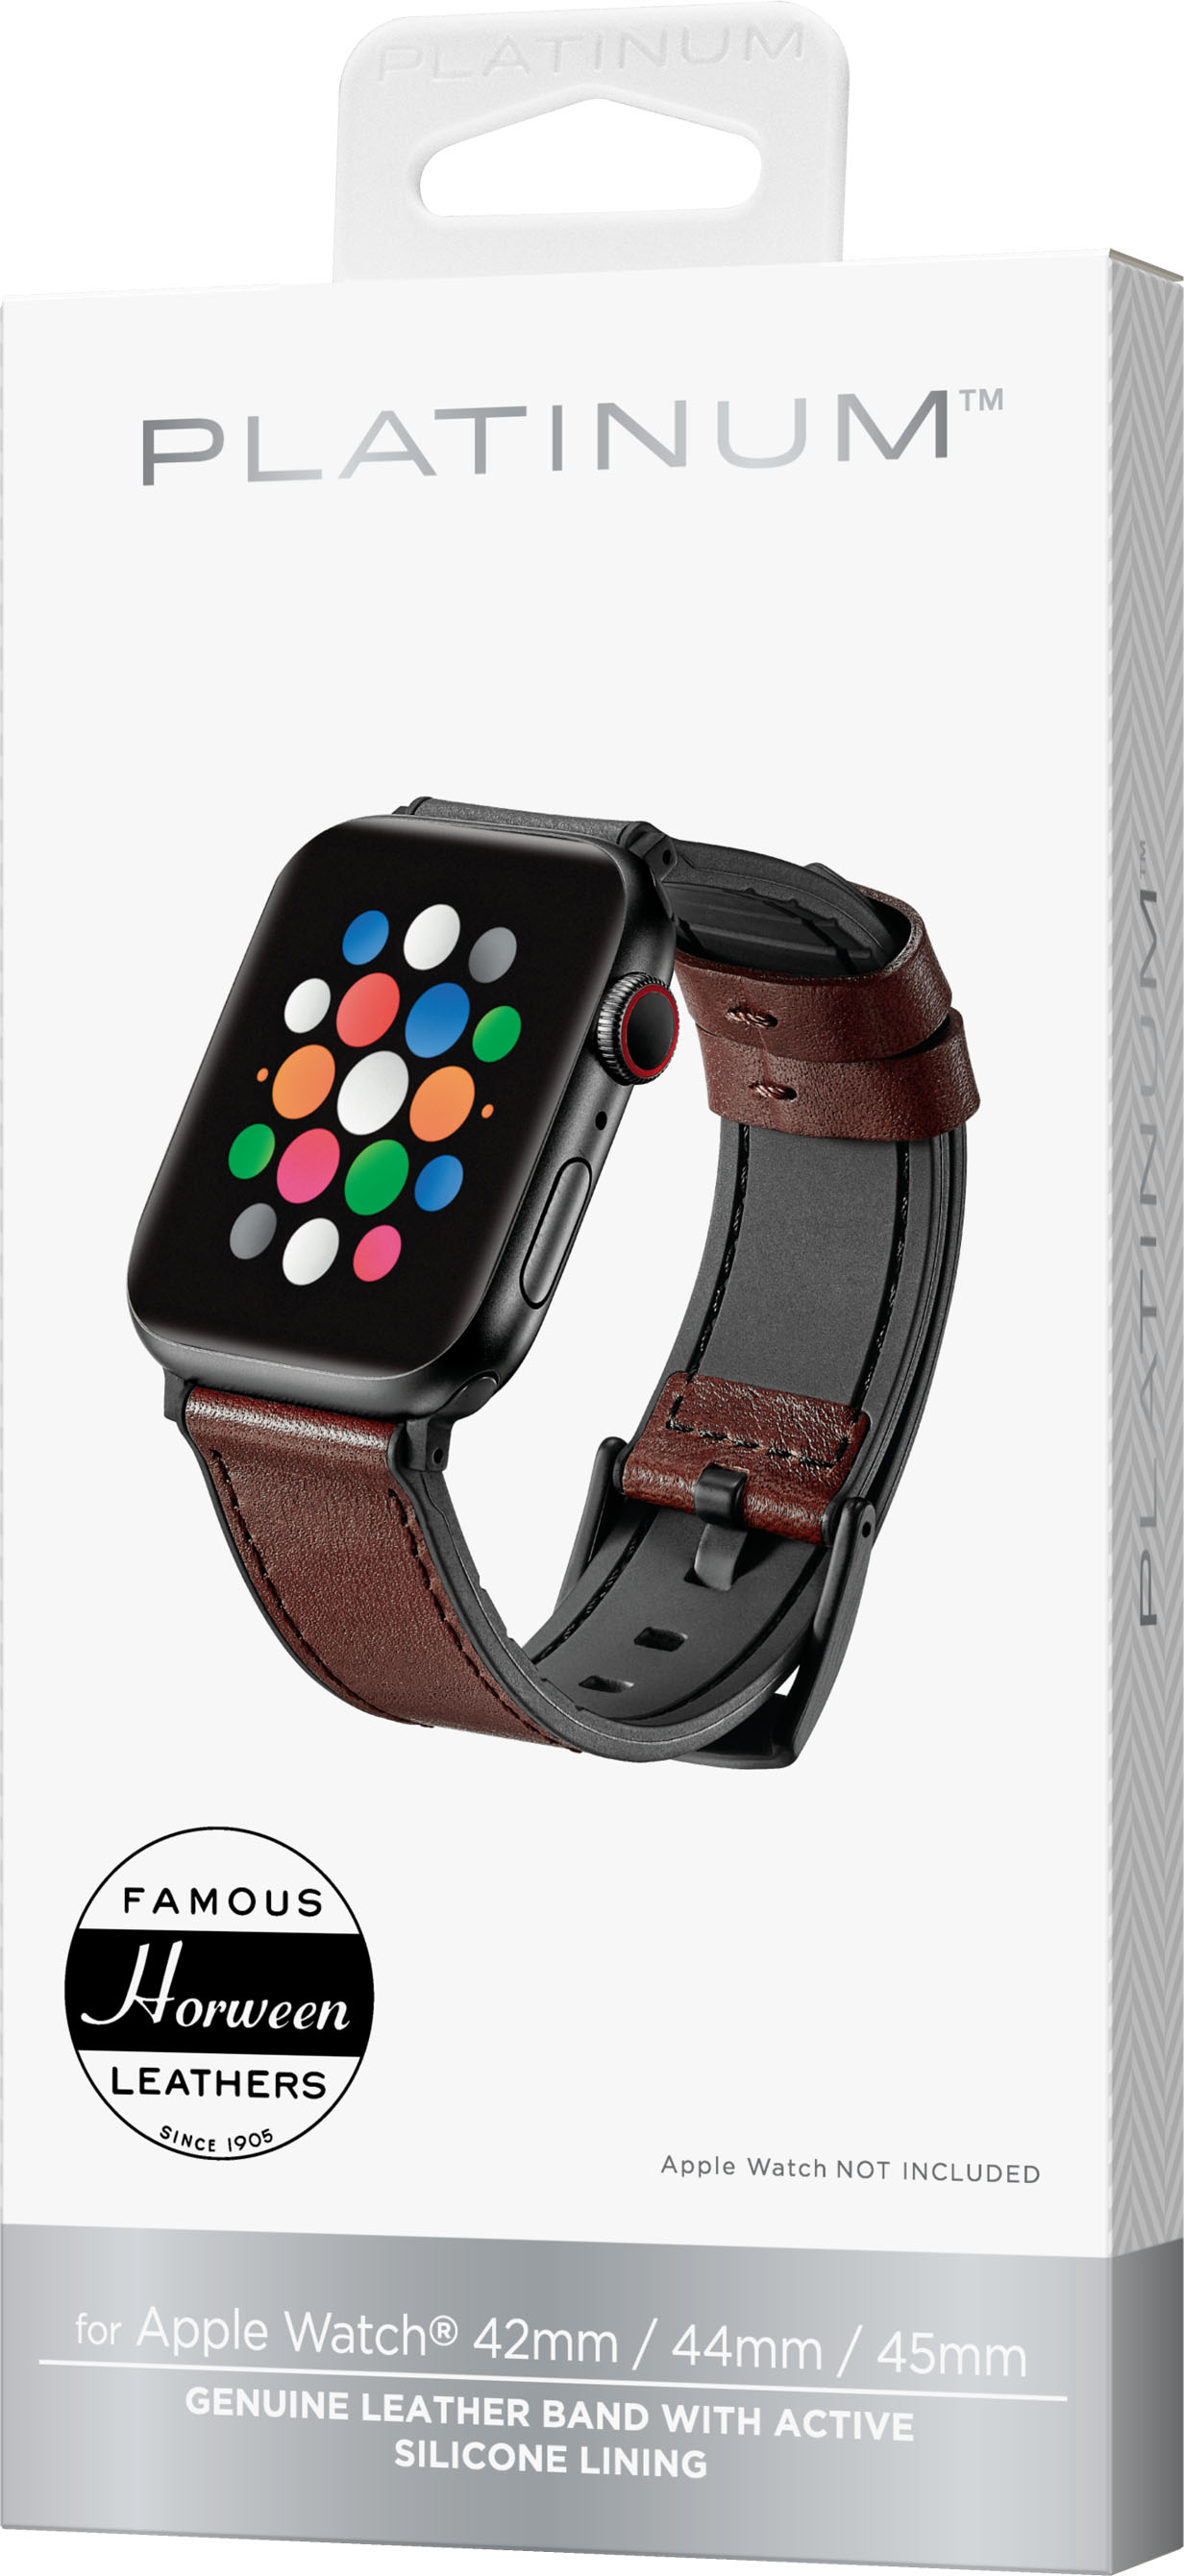 Brown Horse Sport PU Leather Soft Strap Band for iWatch Series 5 4